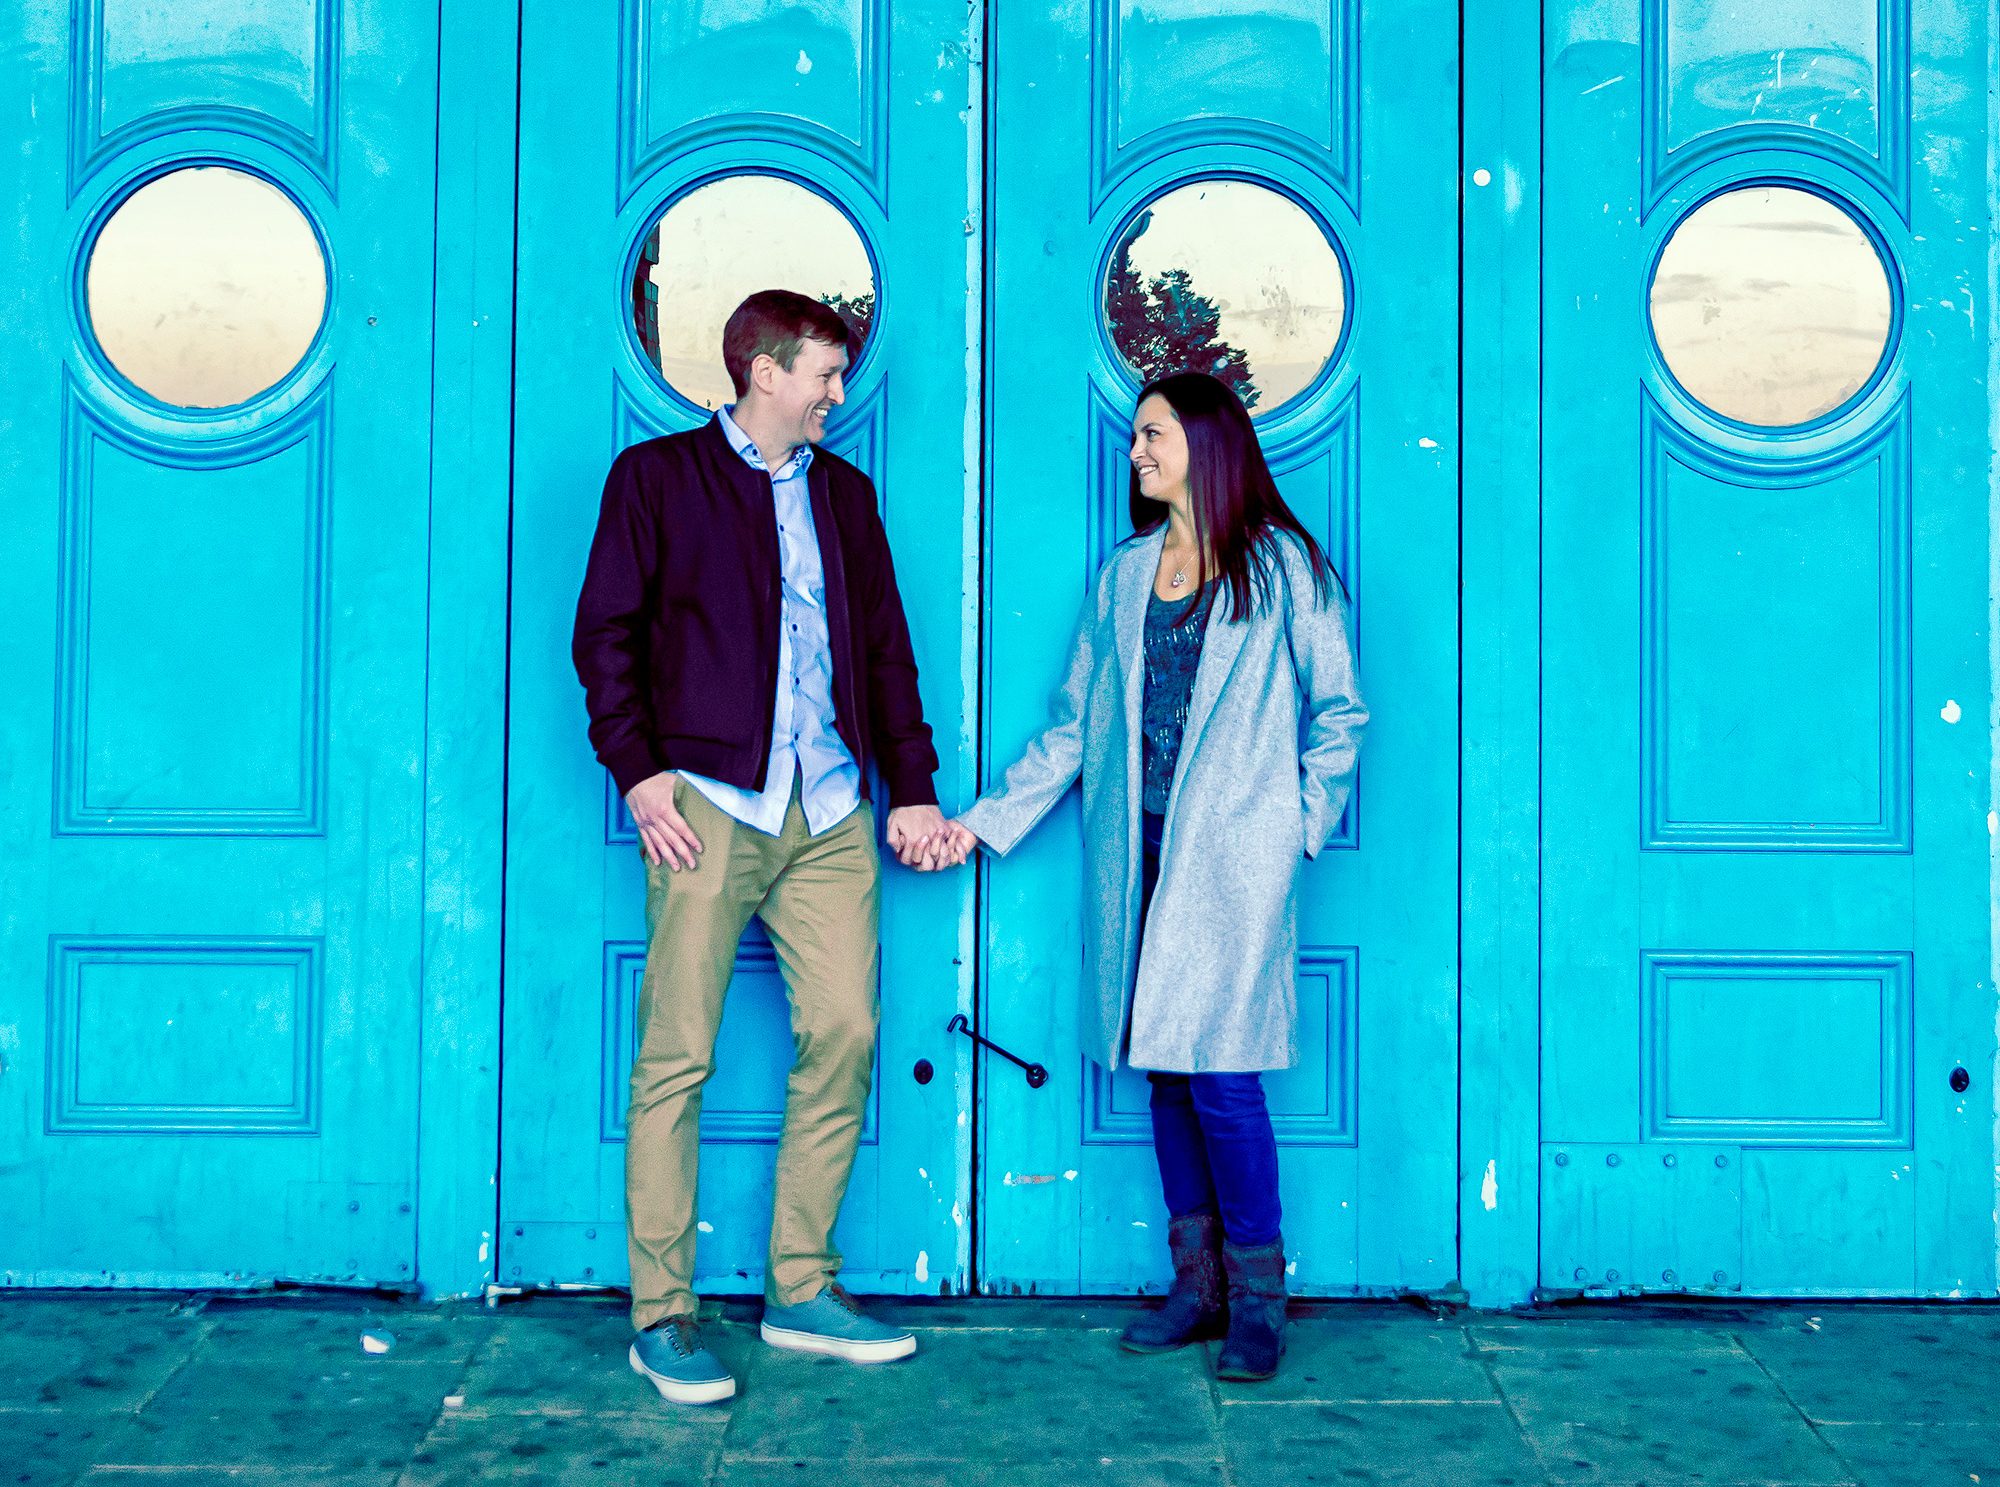 Engaged couple in front of blue doors Alexandra Palace